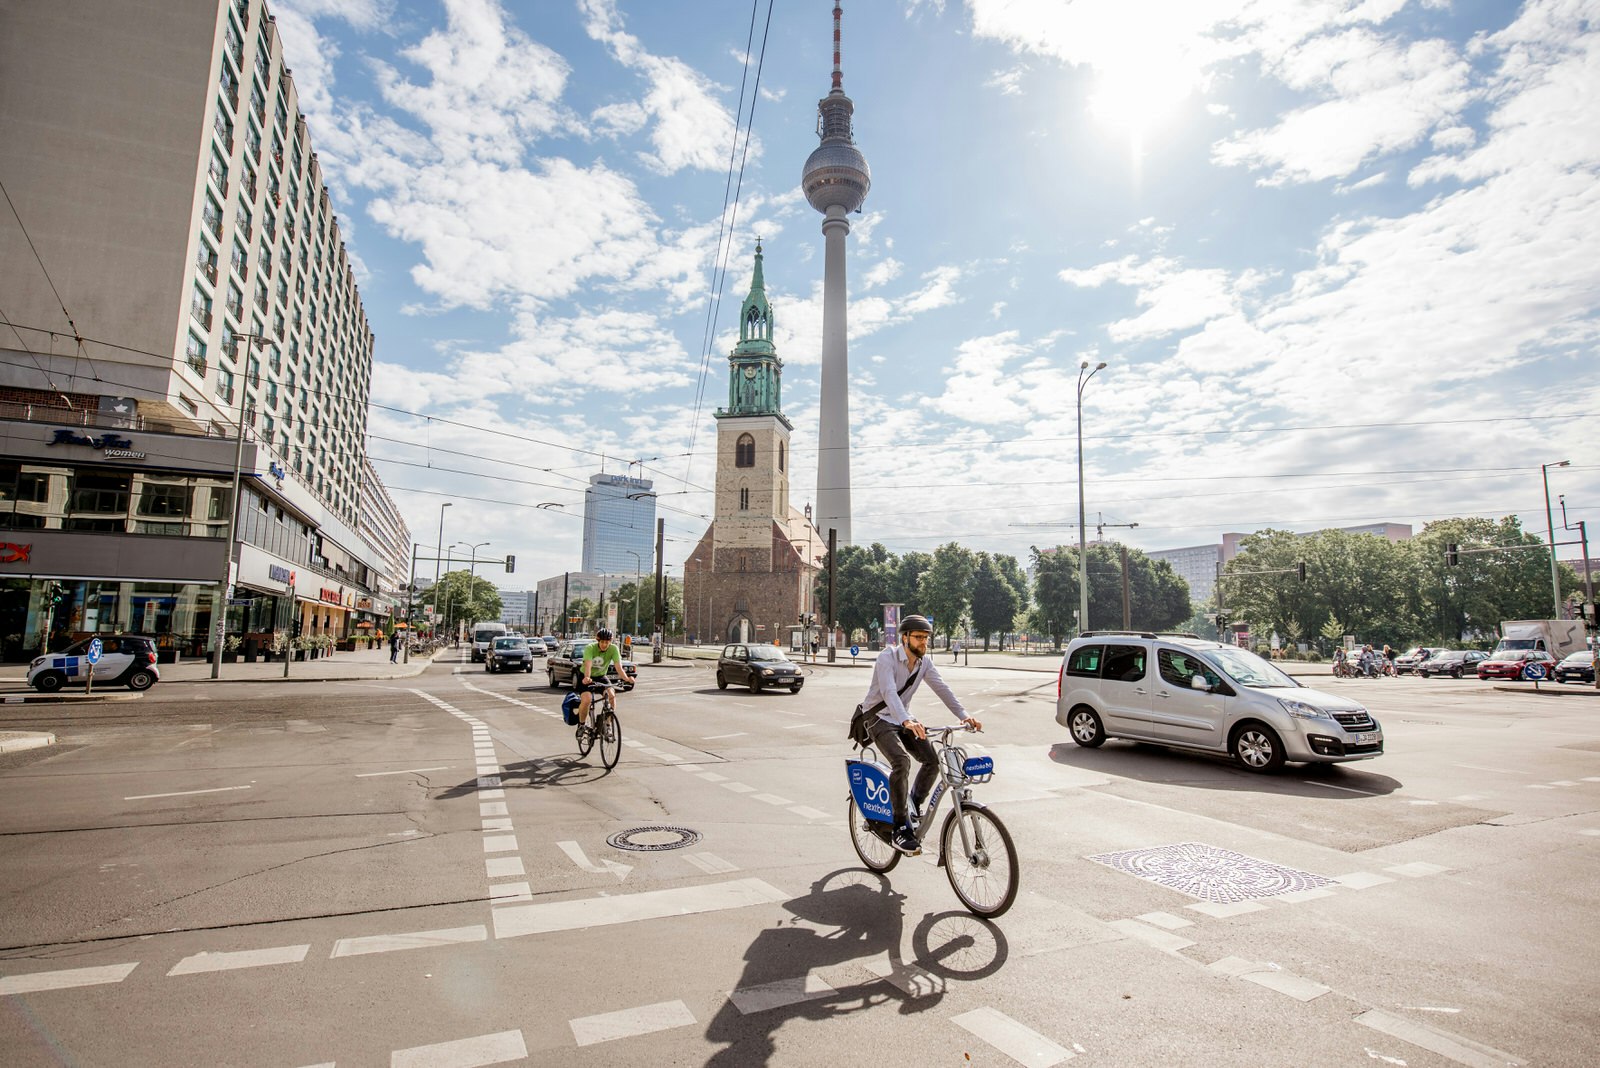 Cyclists and traffic in front of Berlin's Saint Mary church and the television tower (Fernsehturm) in the morning.